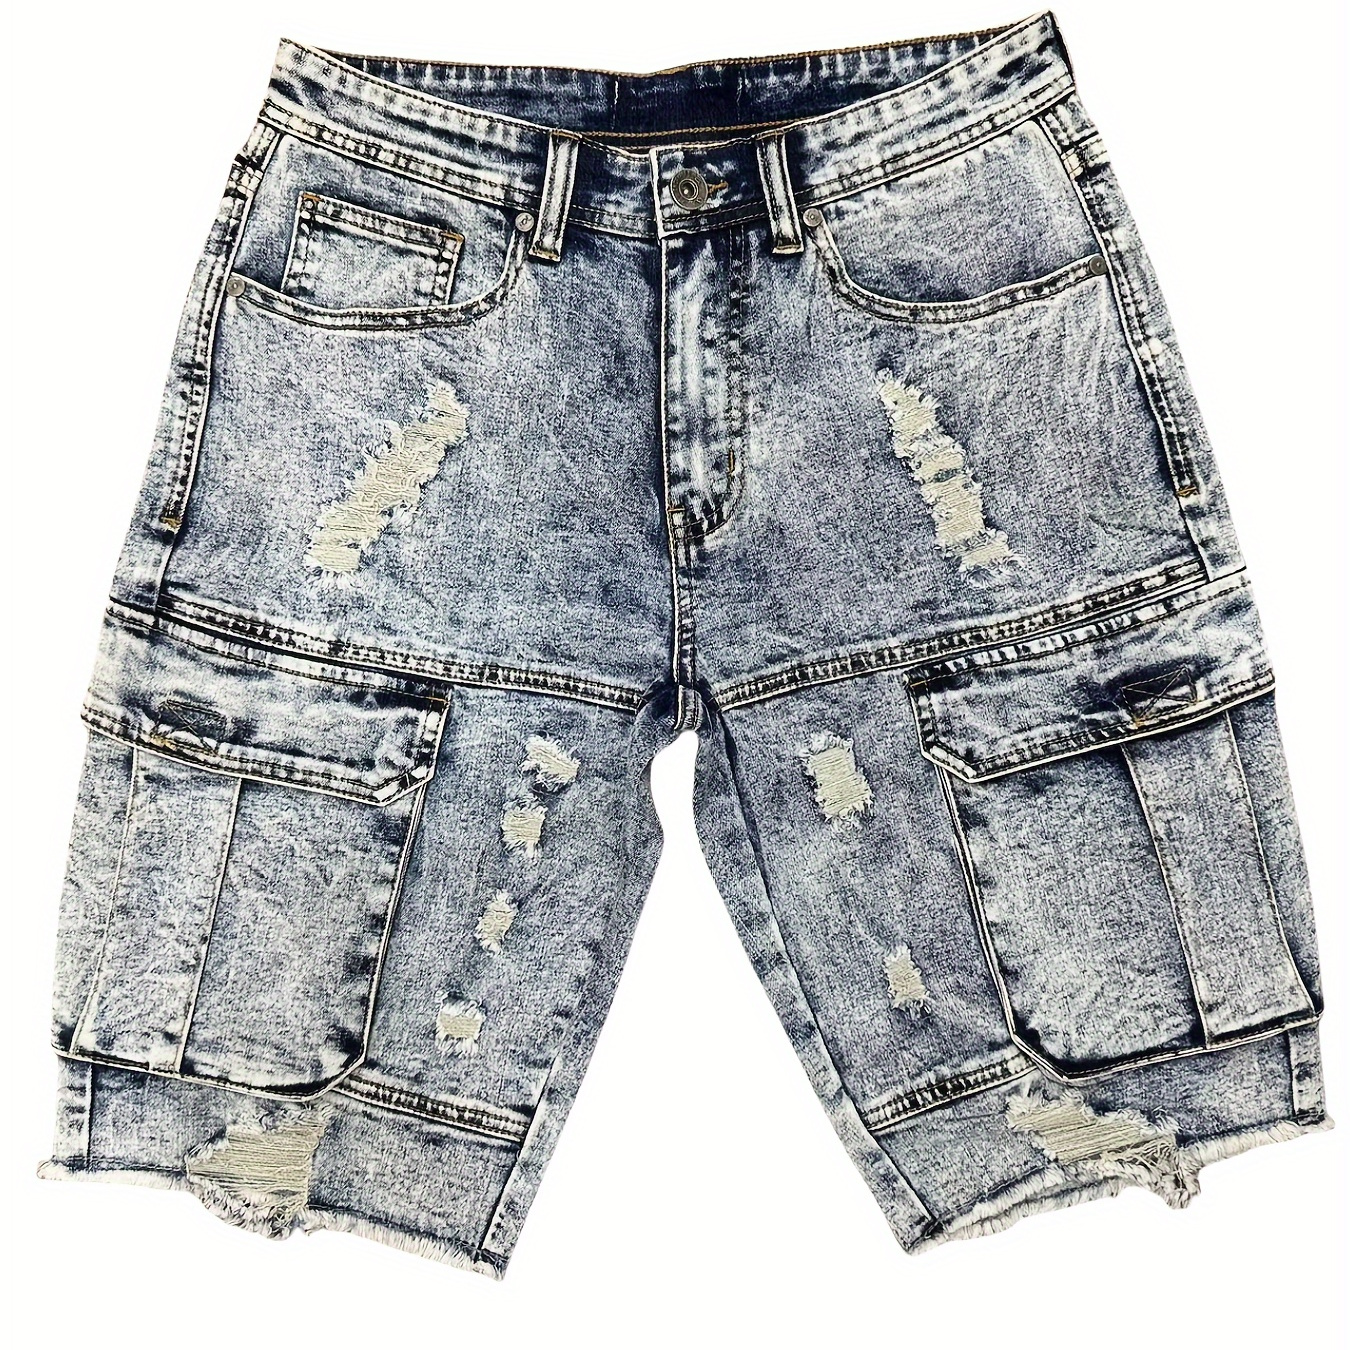 

Men's Denim Cargo Shorts, Distressed Look, Casual Relaxed Fit, Multiple Pockets, Frayed Hem, Knee-length, Size E911820-lb-e5